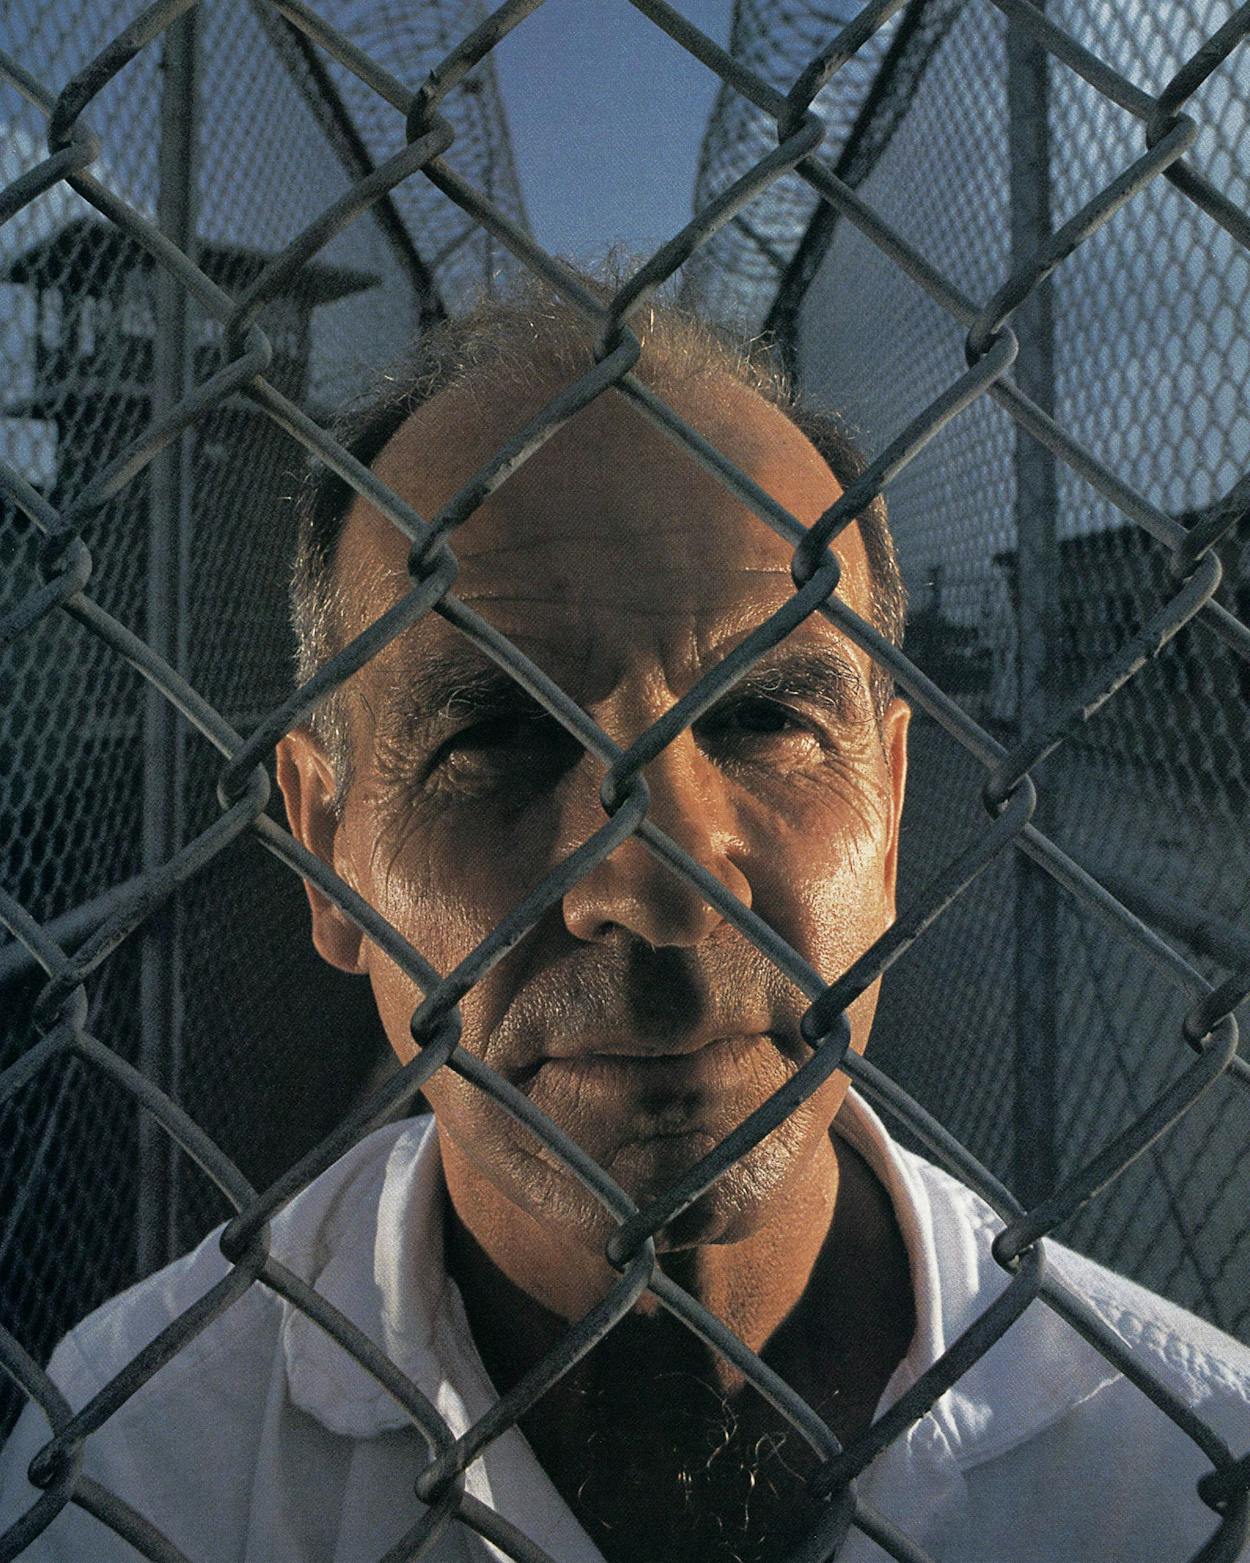 Howard Pharr looks through a chain link fence at prison.